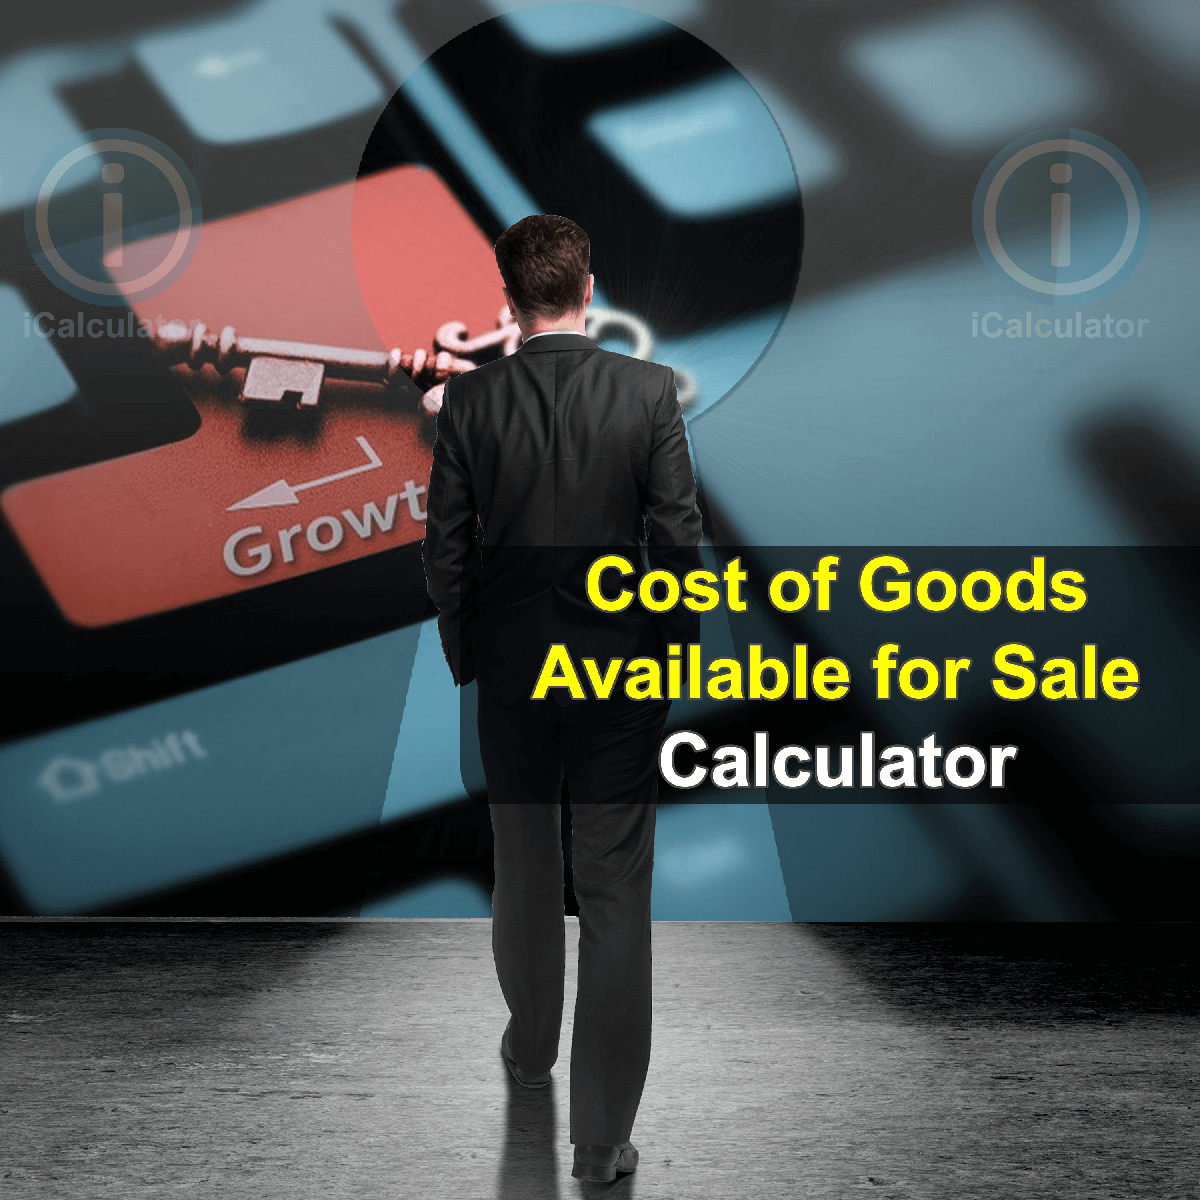 Cost of Goods Available For Sale Calculator. This image provides details of how to calculate Cost of Goods Available For Sale using a calculator, pen and paper. By using the Cost of Goods Available For Sale formula, the Cost of Goods Available For Sale Calculator provides a true calculation of the price paid for the inventory that is readily available for customers to purchase.